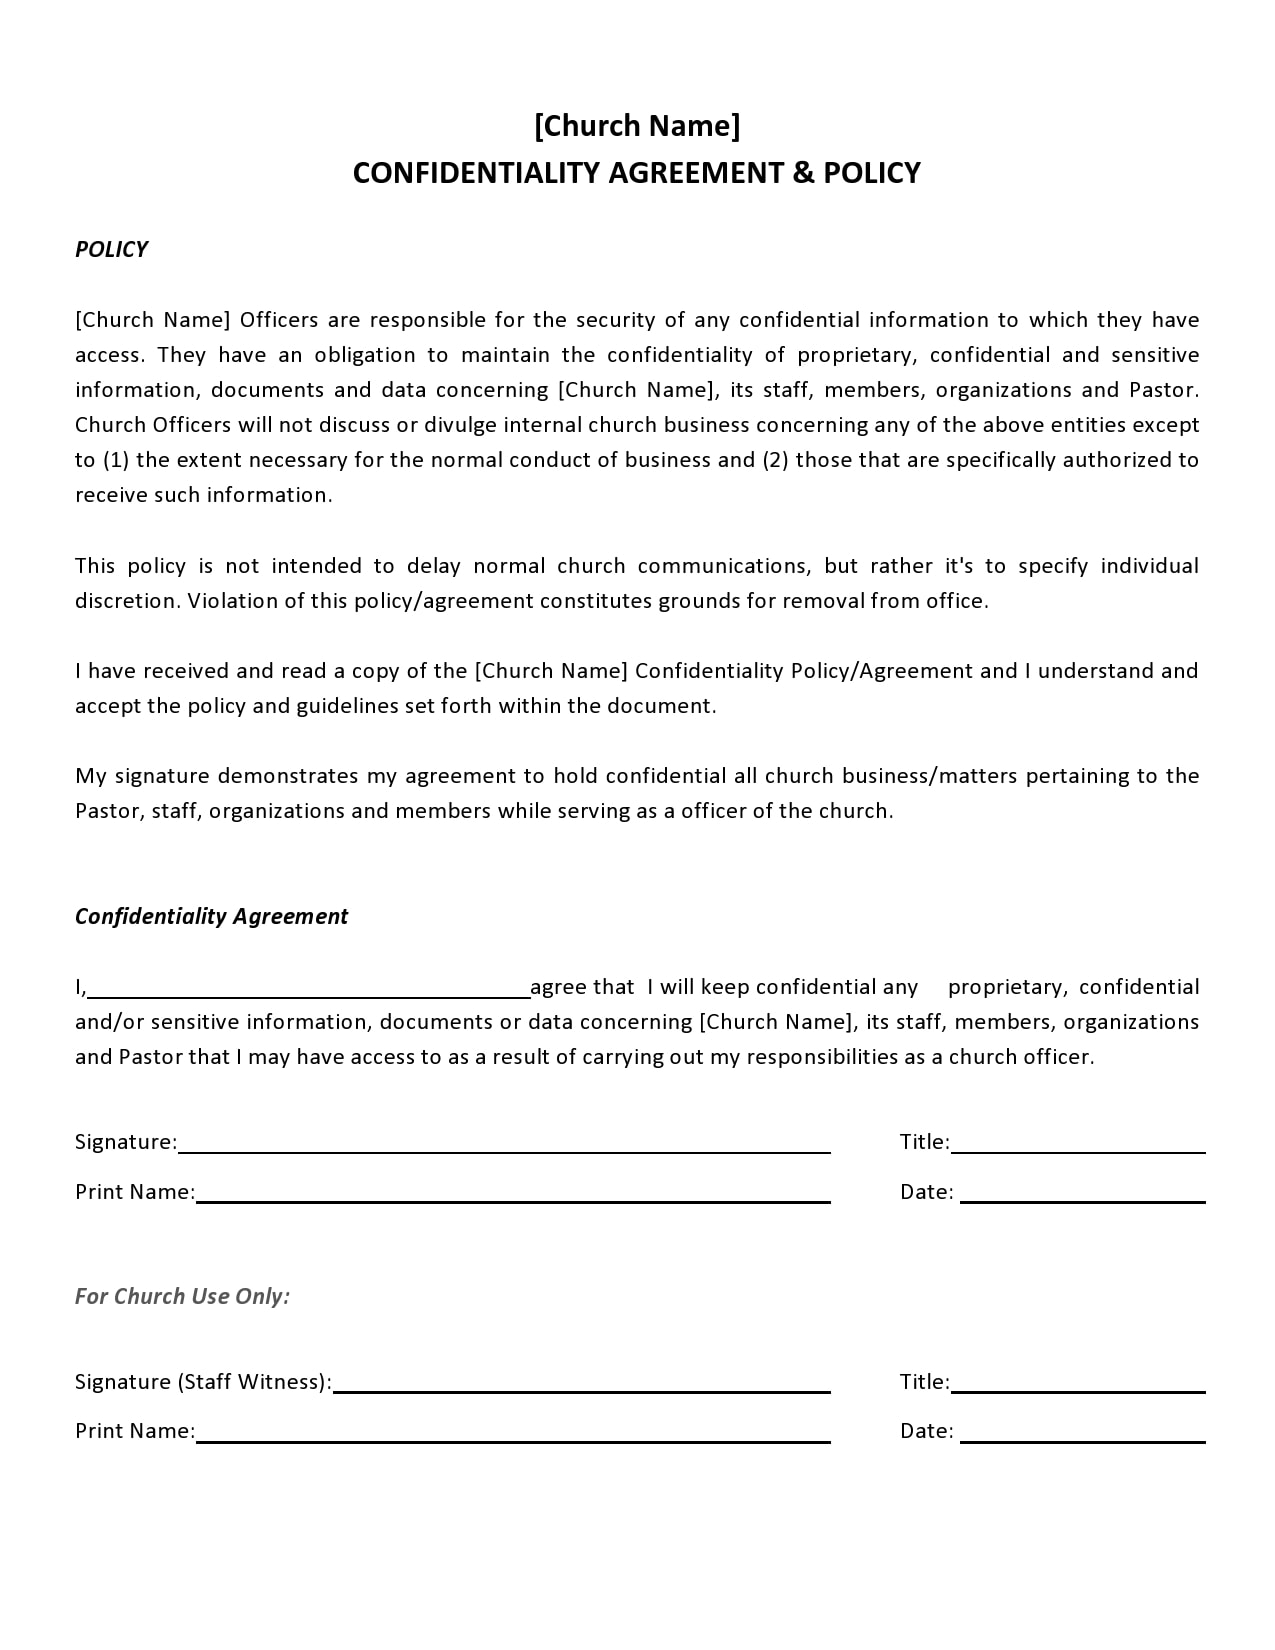 45 Free Confidentiality Agreement Templates NDA TemplateArchive